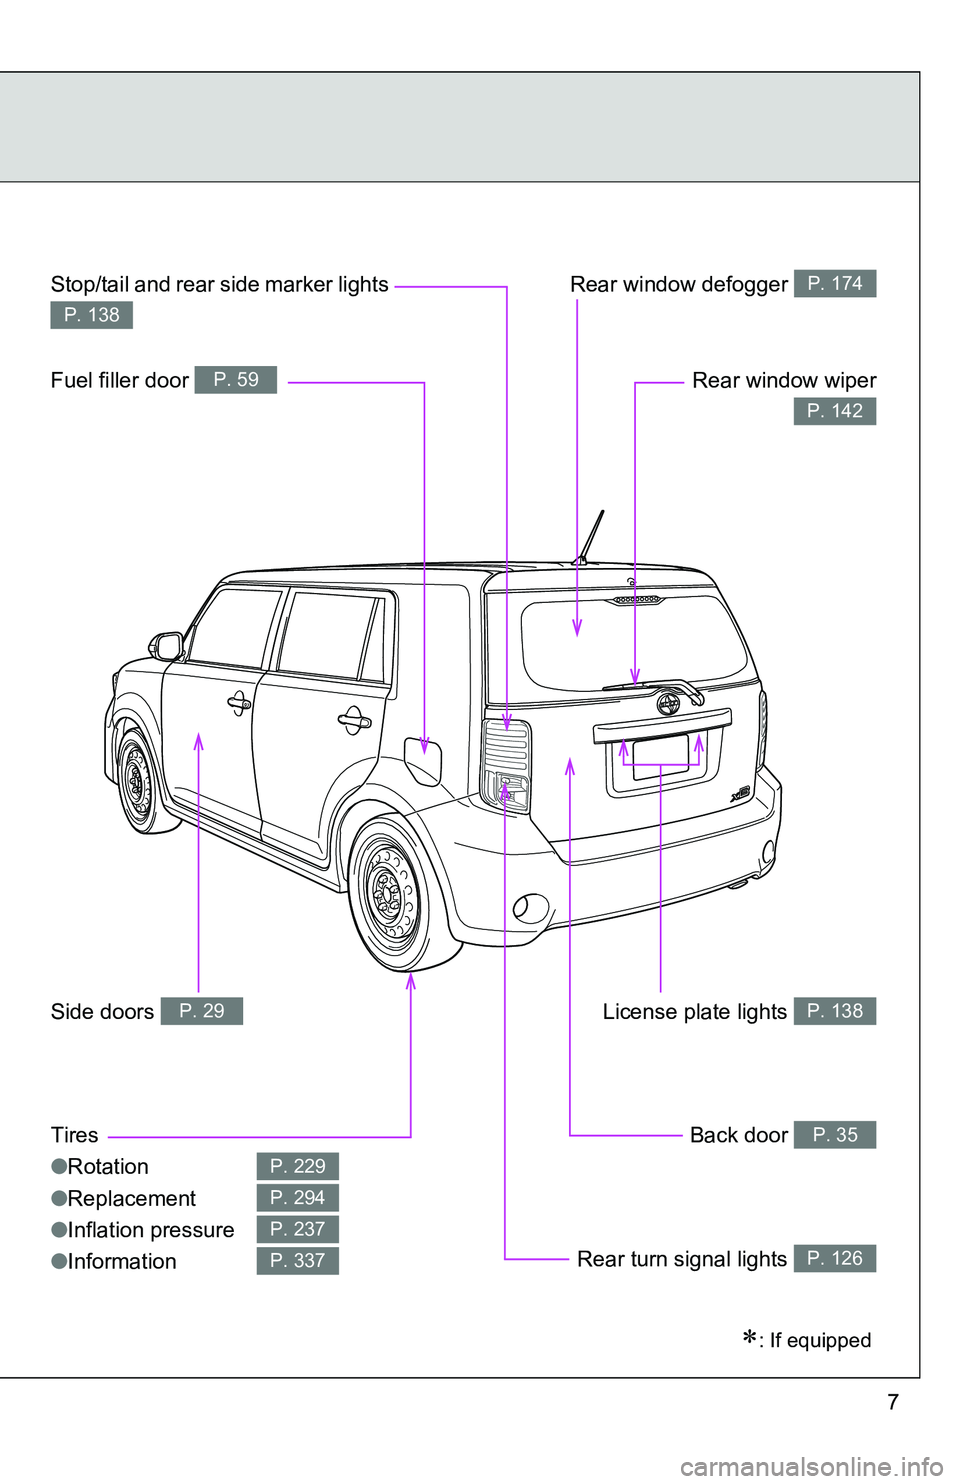 TOYOTA xB 2011  Owners Manual (in English) 7
Rear window defogger P. 174
Rear window wiper
P. 142
License plate lights P. 138
Back door P. 35
Rear turn signal lights P. 126
Stop/tail and rear side marker lights 
P. 138
Fuel filler door P. 59
S